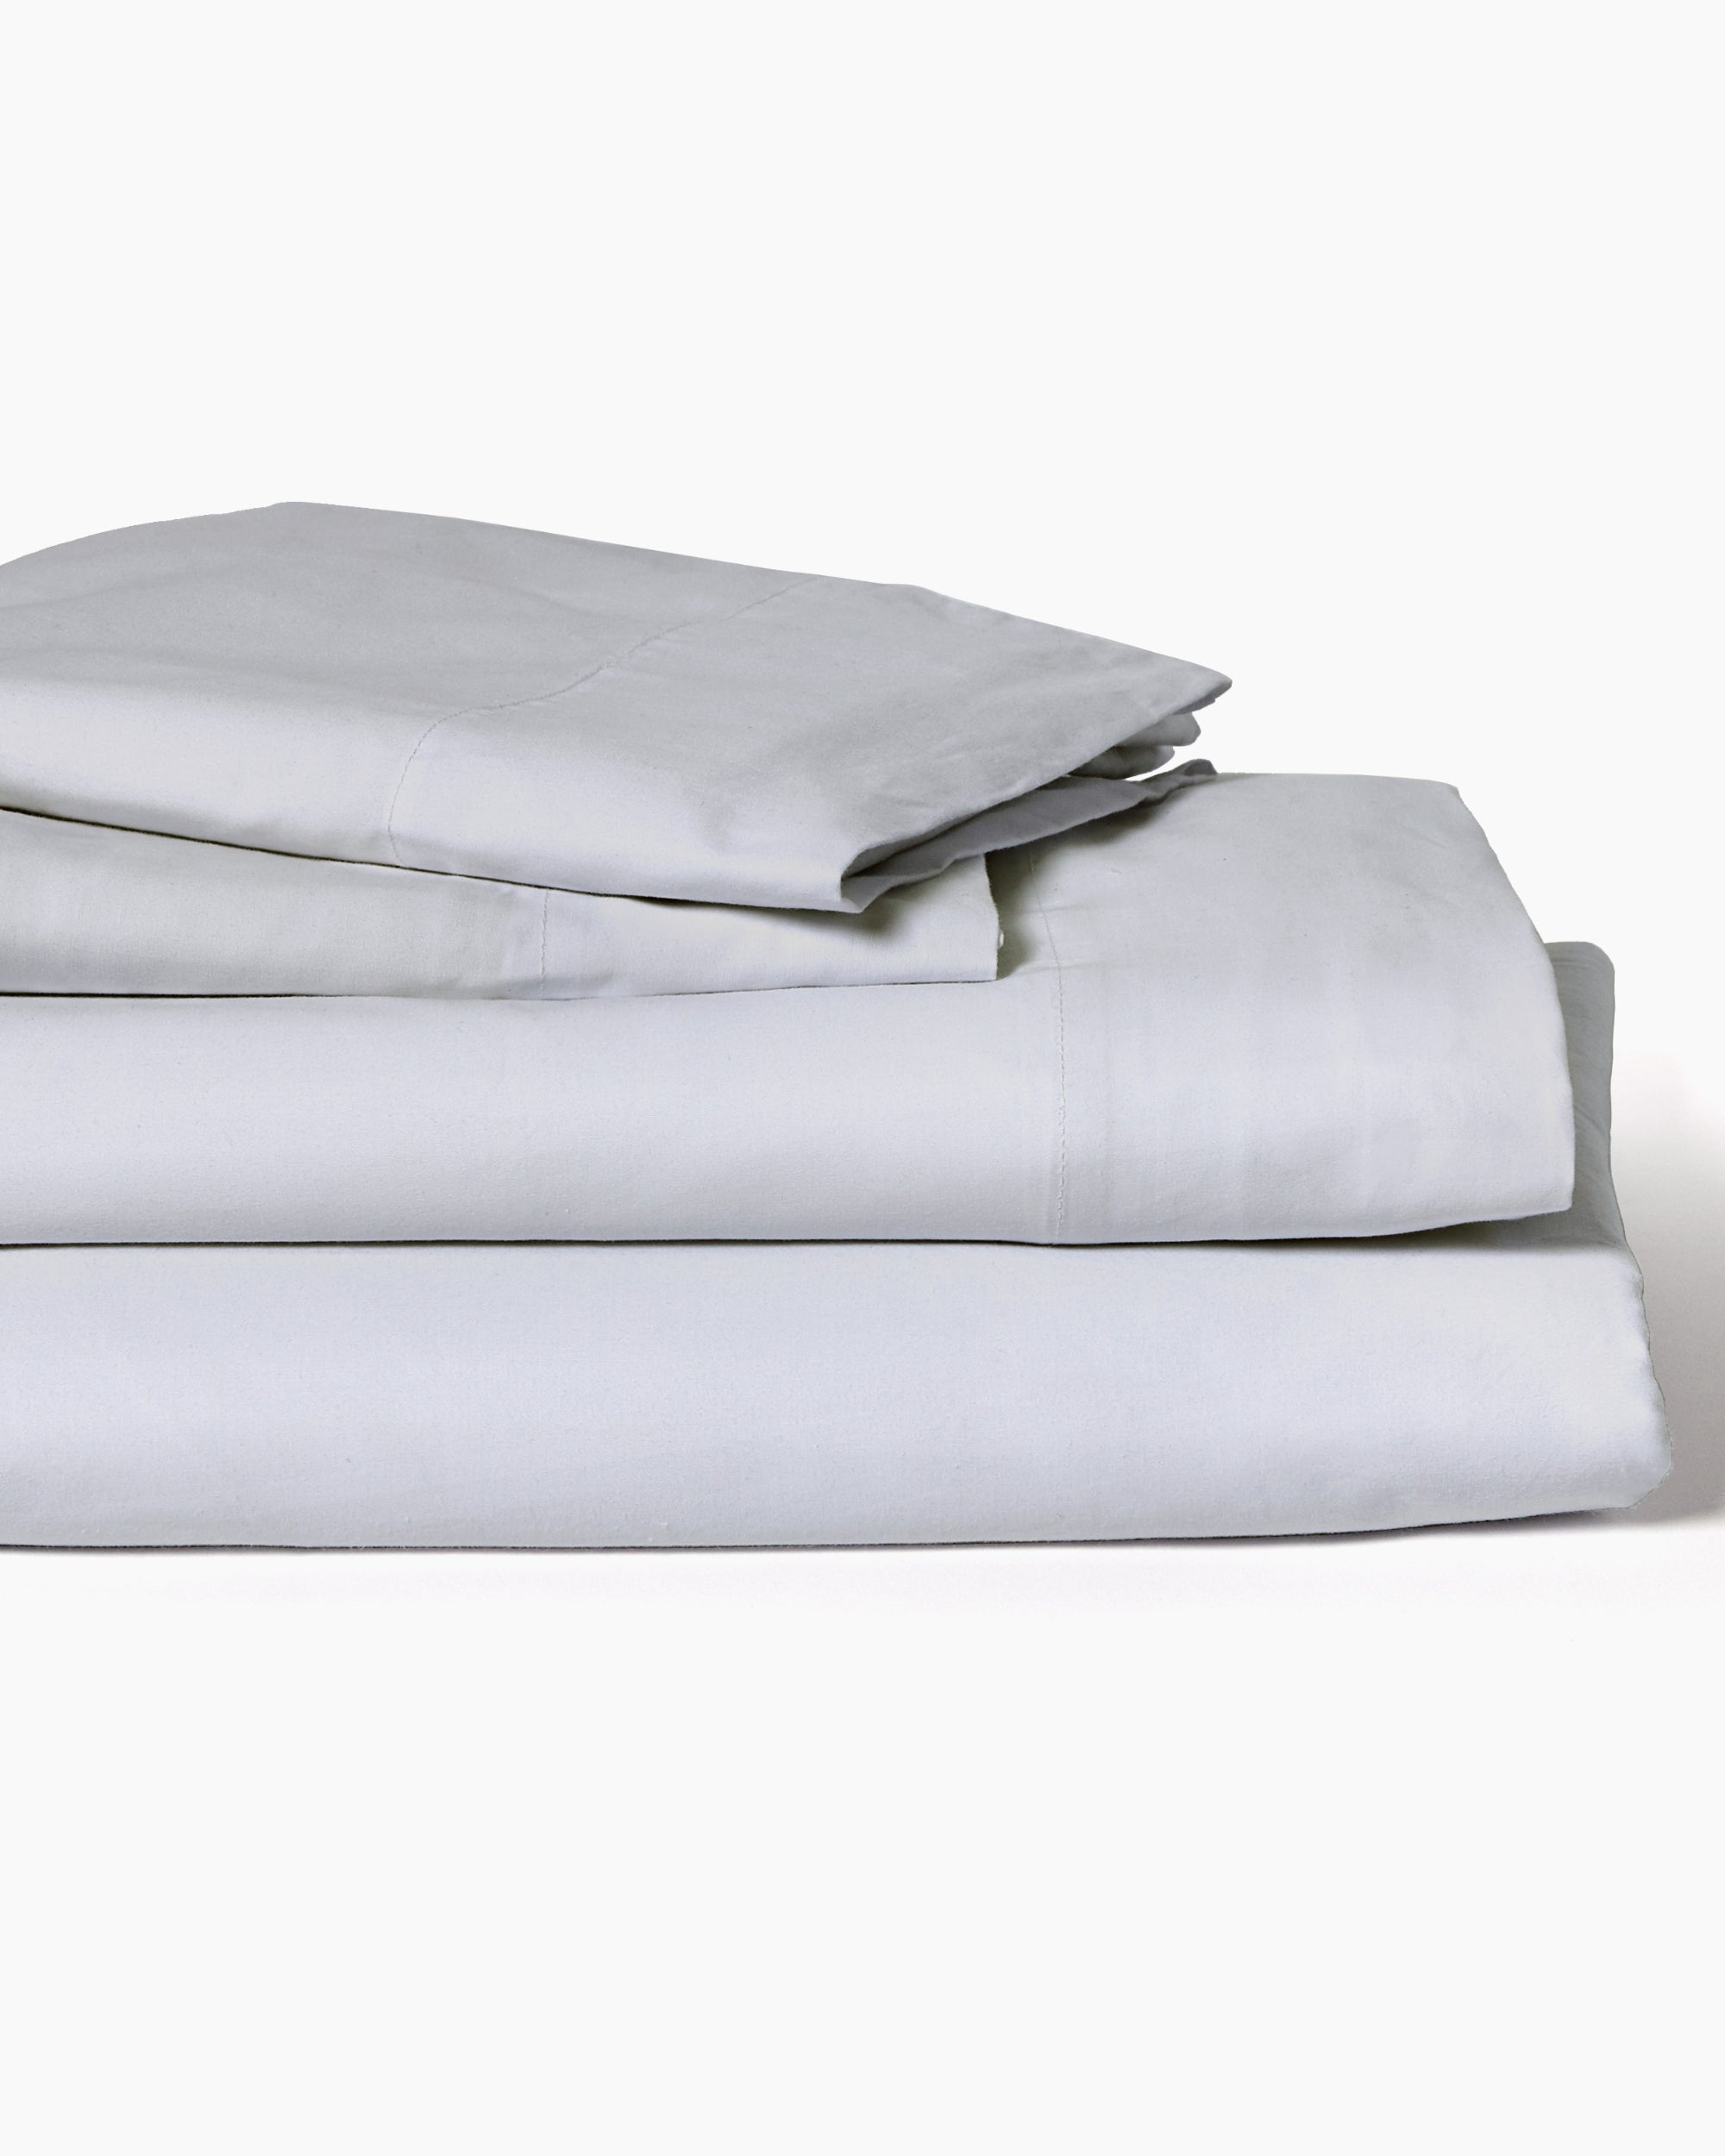 made in america cotton percale bed sheets in beautiful carolina gray